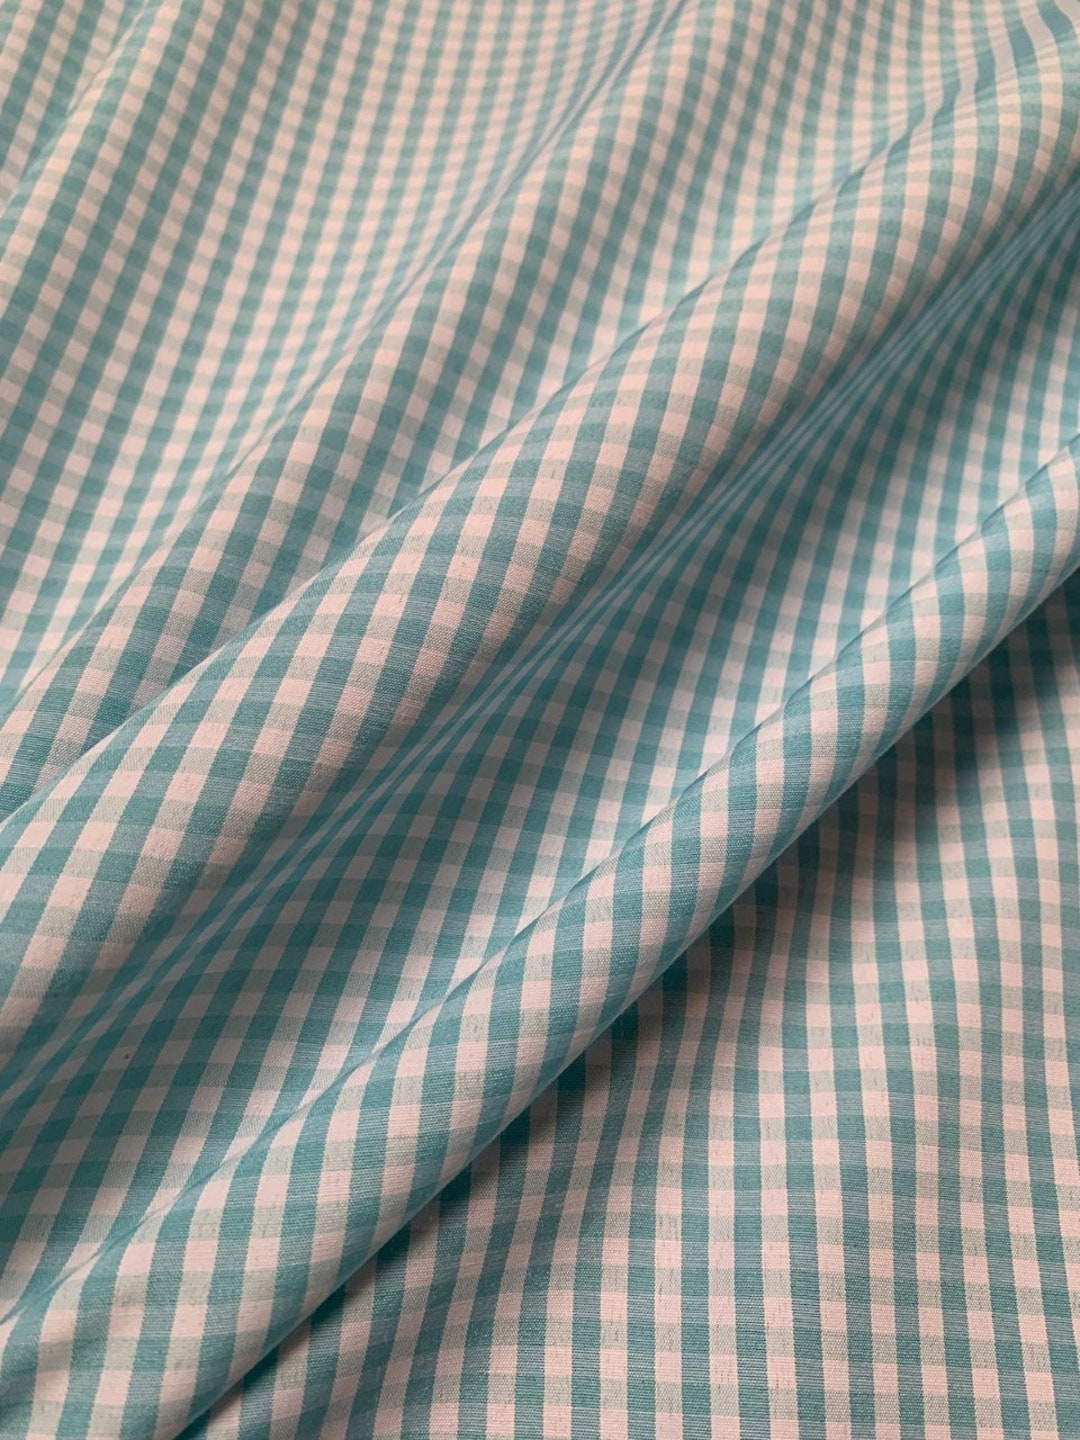 1/4 inch Red Gingham Fabric per Yard 60 inch Polyester/Cotton Blend